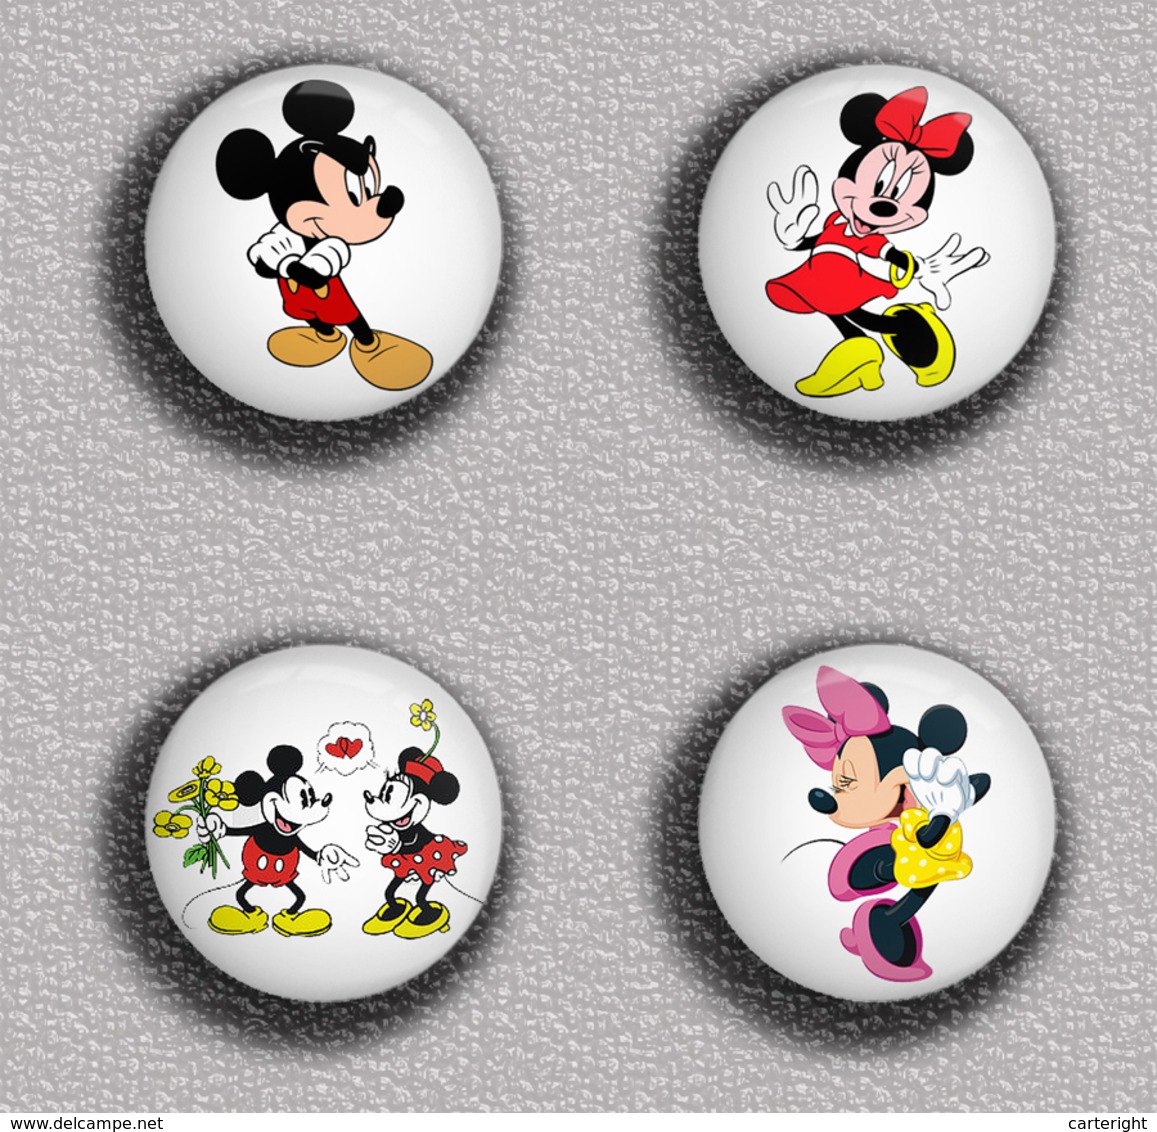 Mickey and Minnie BADGE BUTTON PIN SET 11 (1inch/25mm diameter) 175 DIFF